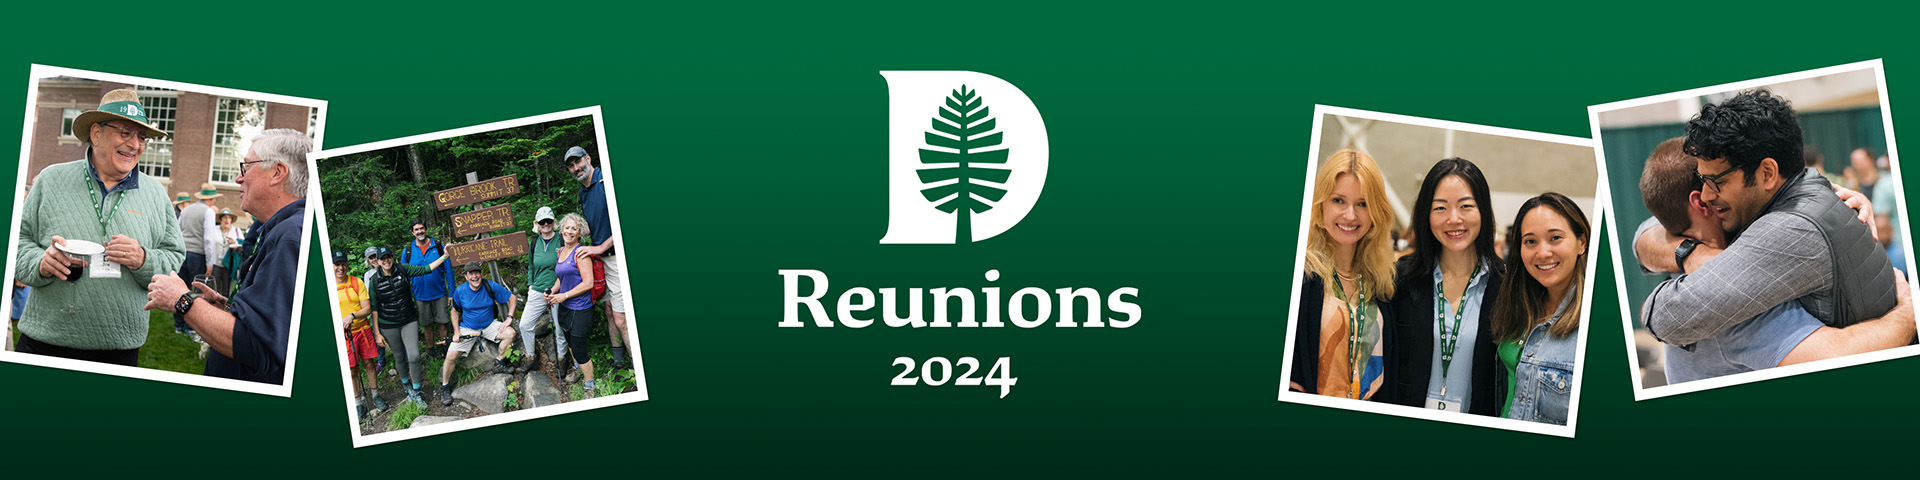 Reunions 2024 logo with four images of alums at past reunions